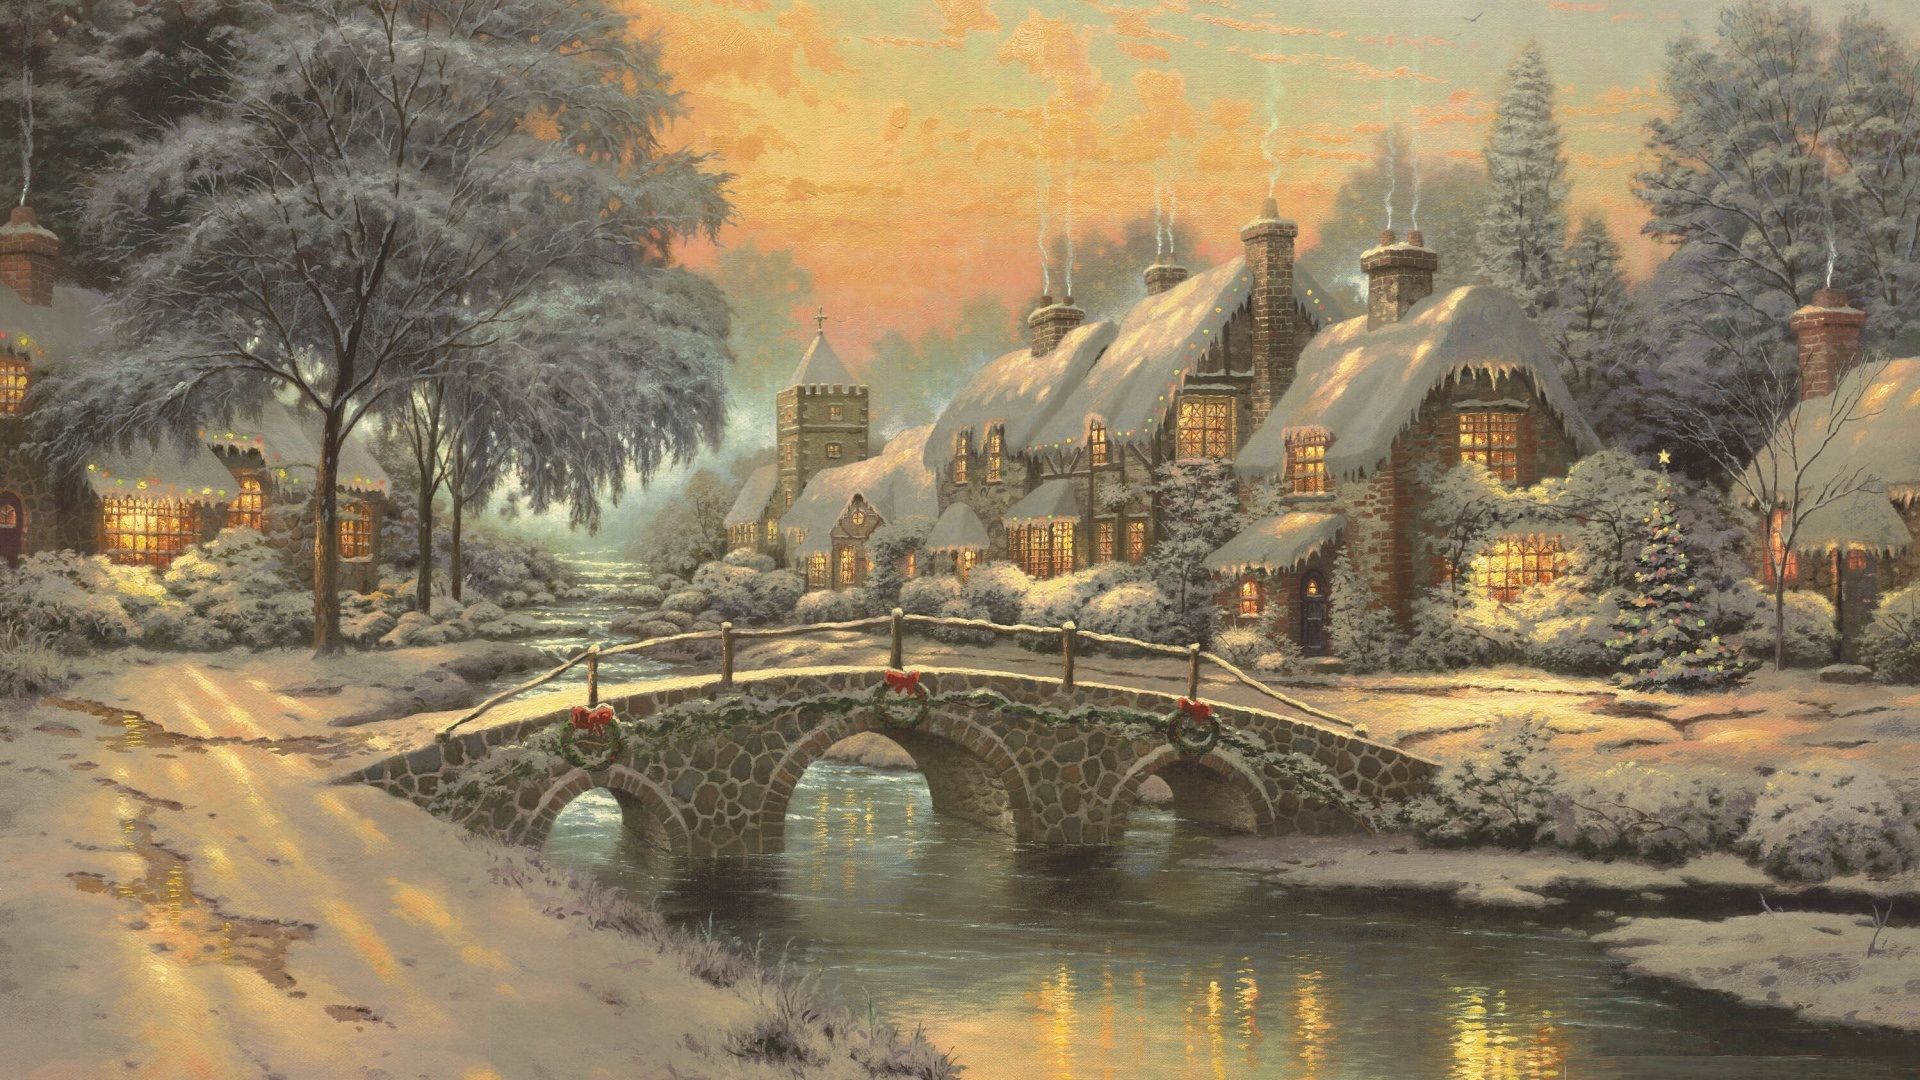 classic christmas painting HD wallpaper free download classic